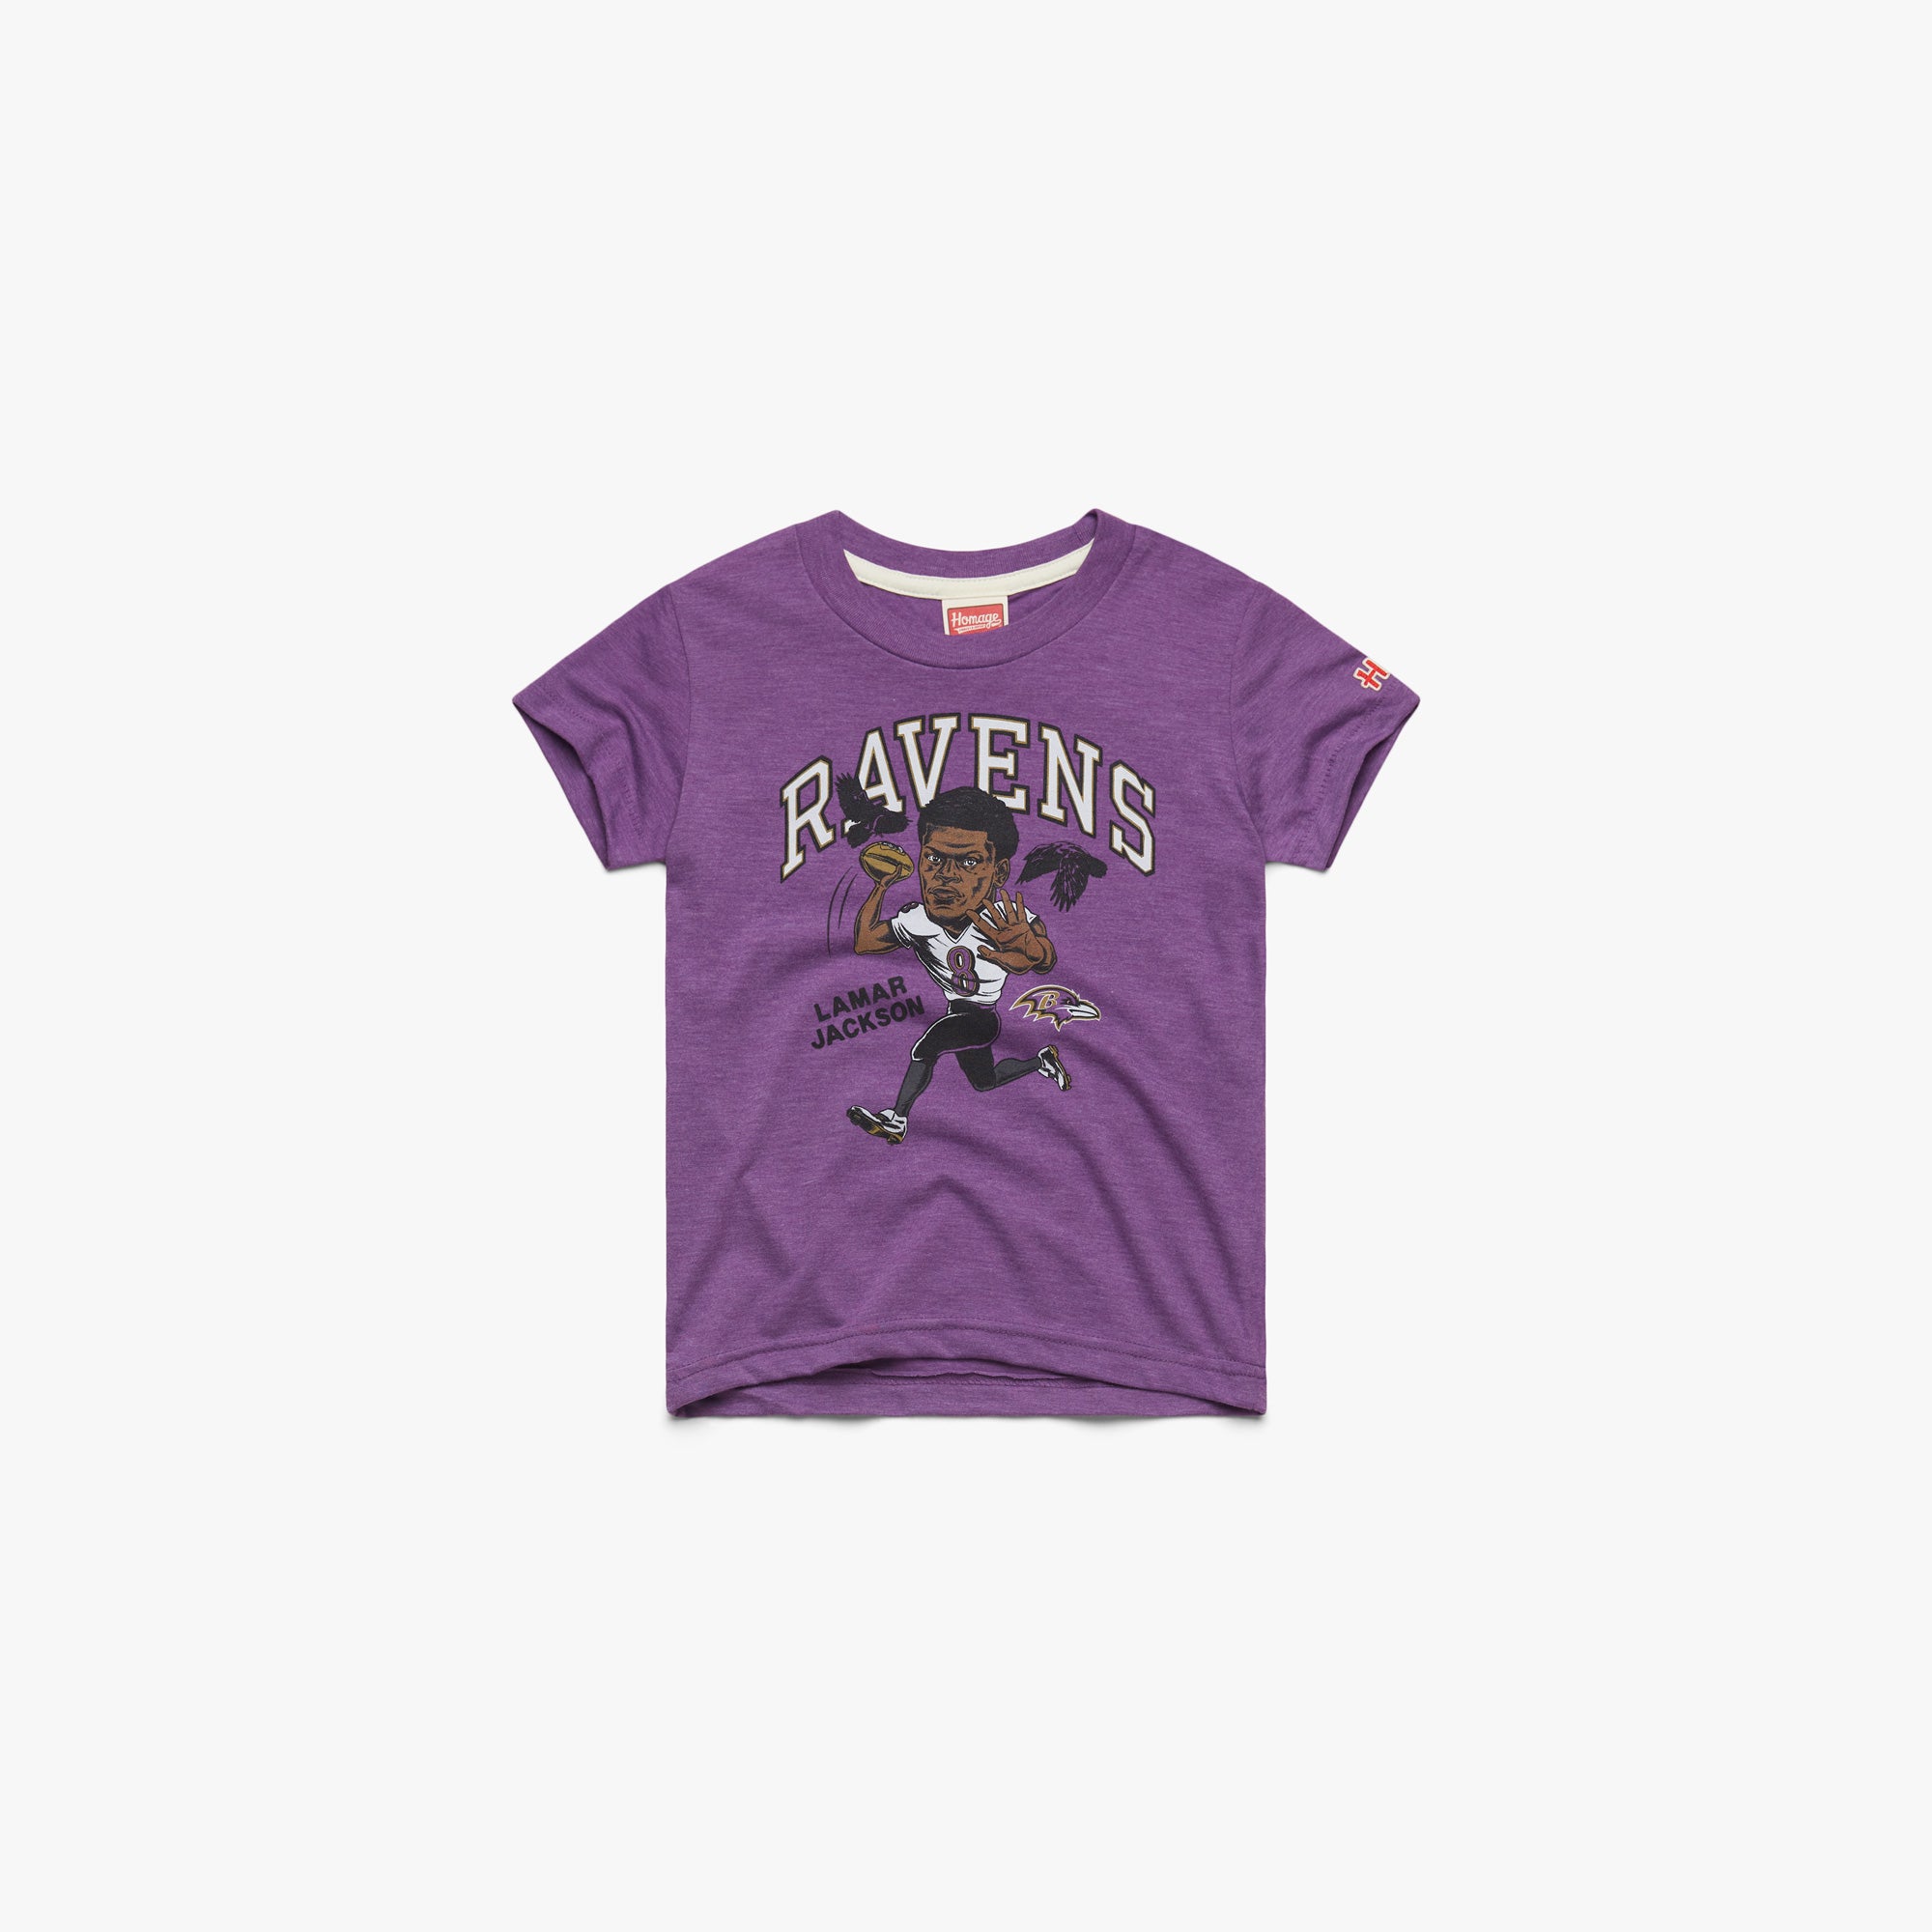 Youth Baltimore Ravens Lamar Jackson Youth T-Shirt from Homage. | Officially Licensed Vintage NFL Apparel from Homage Pro Shop.